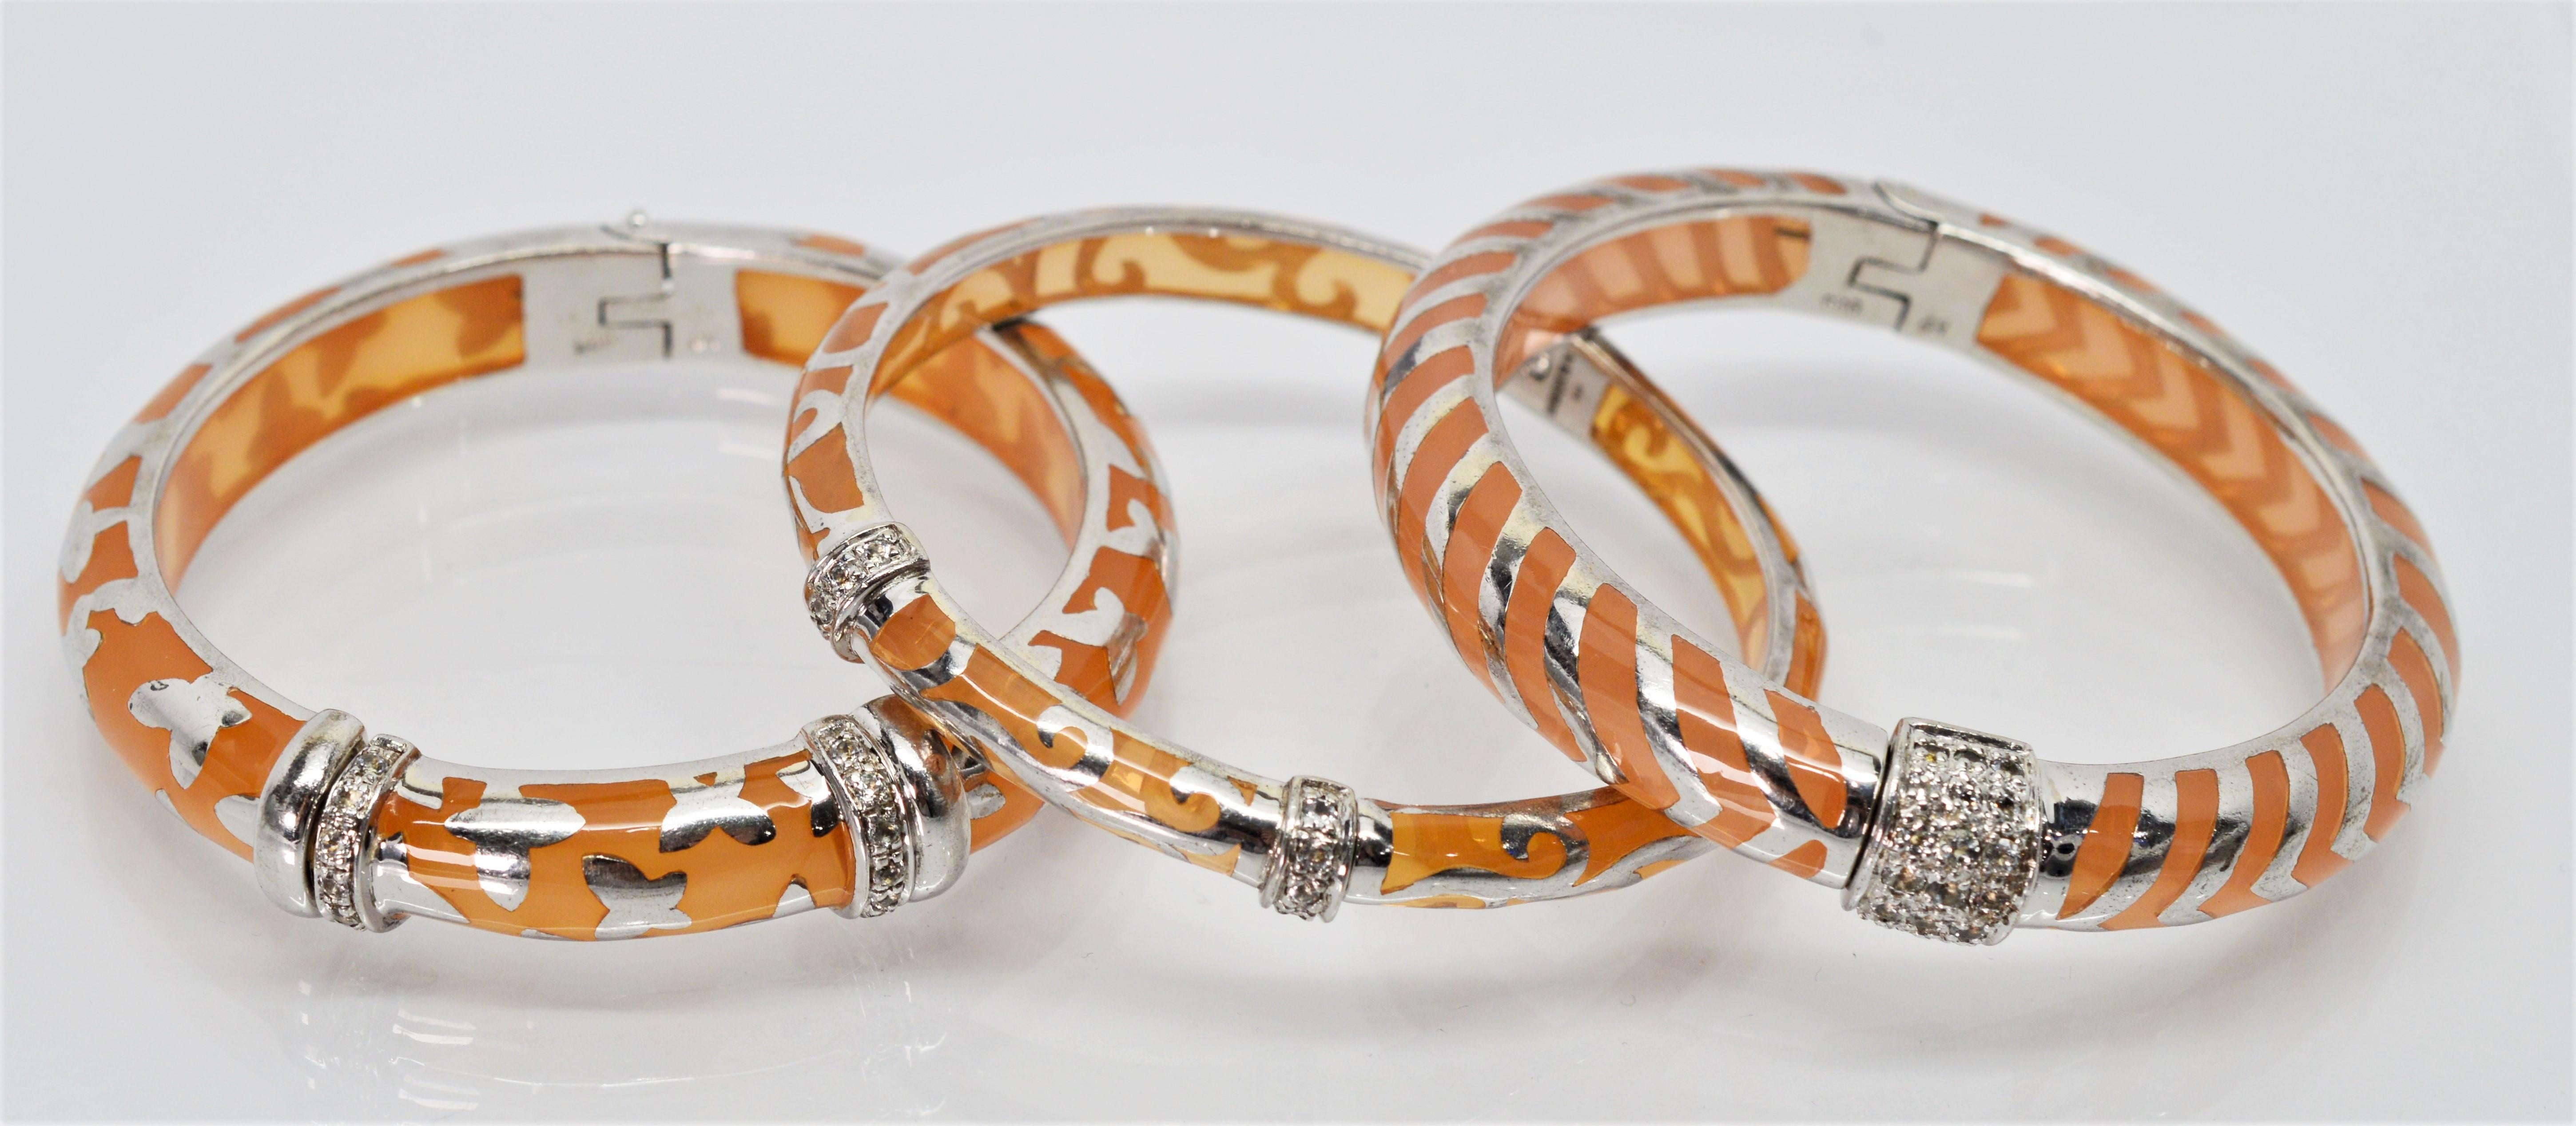 Wearable works of art describe this modern trio of Angelique de Paris Bangle Bracelets. Three complementing styles in Angelique's signature peach
resin and sterling silver with a platinum rhodium finish and round cut white topaz stations. Each